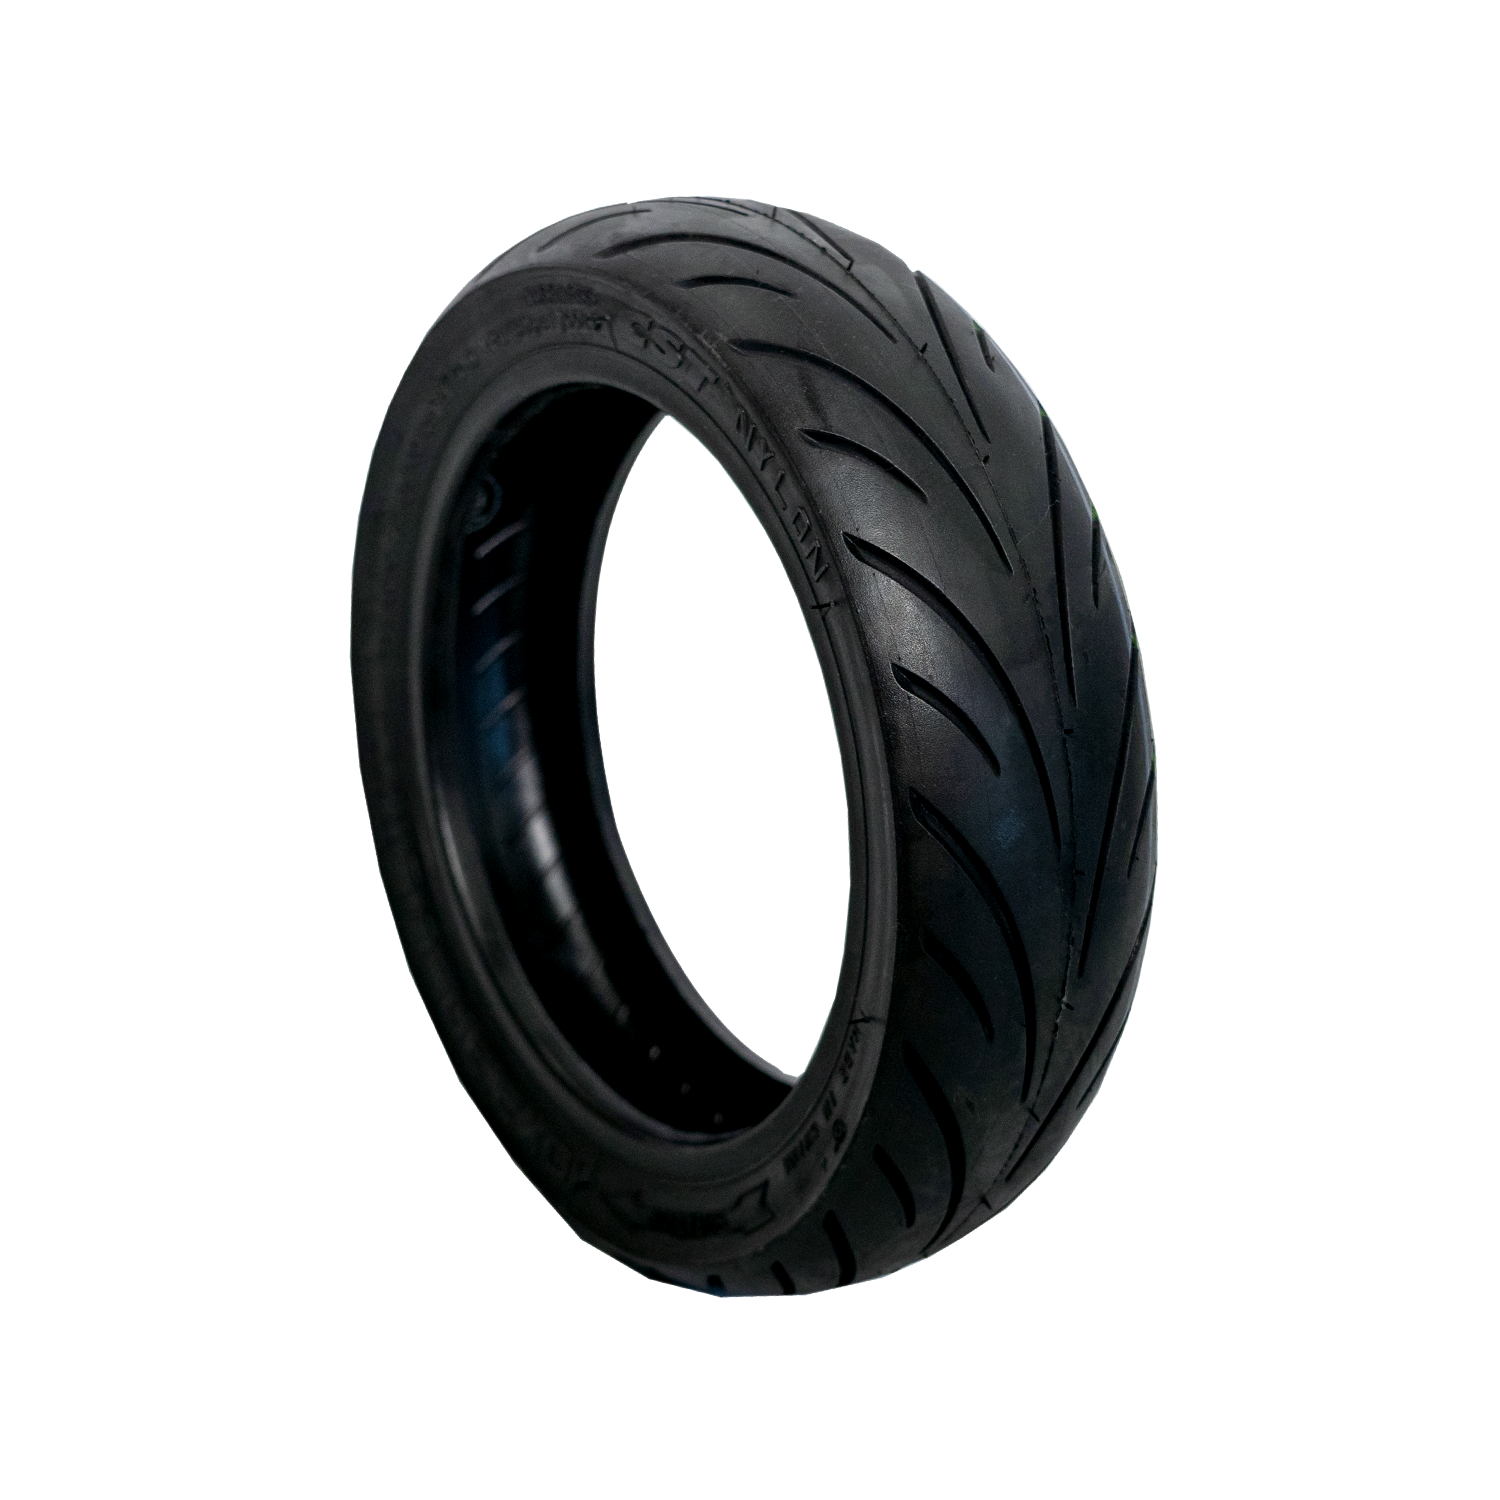 NIU tires for KQi2 Scooters